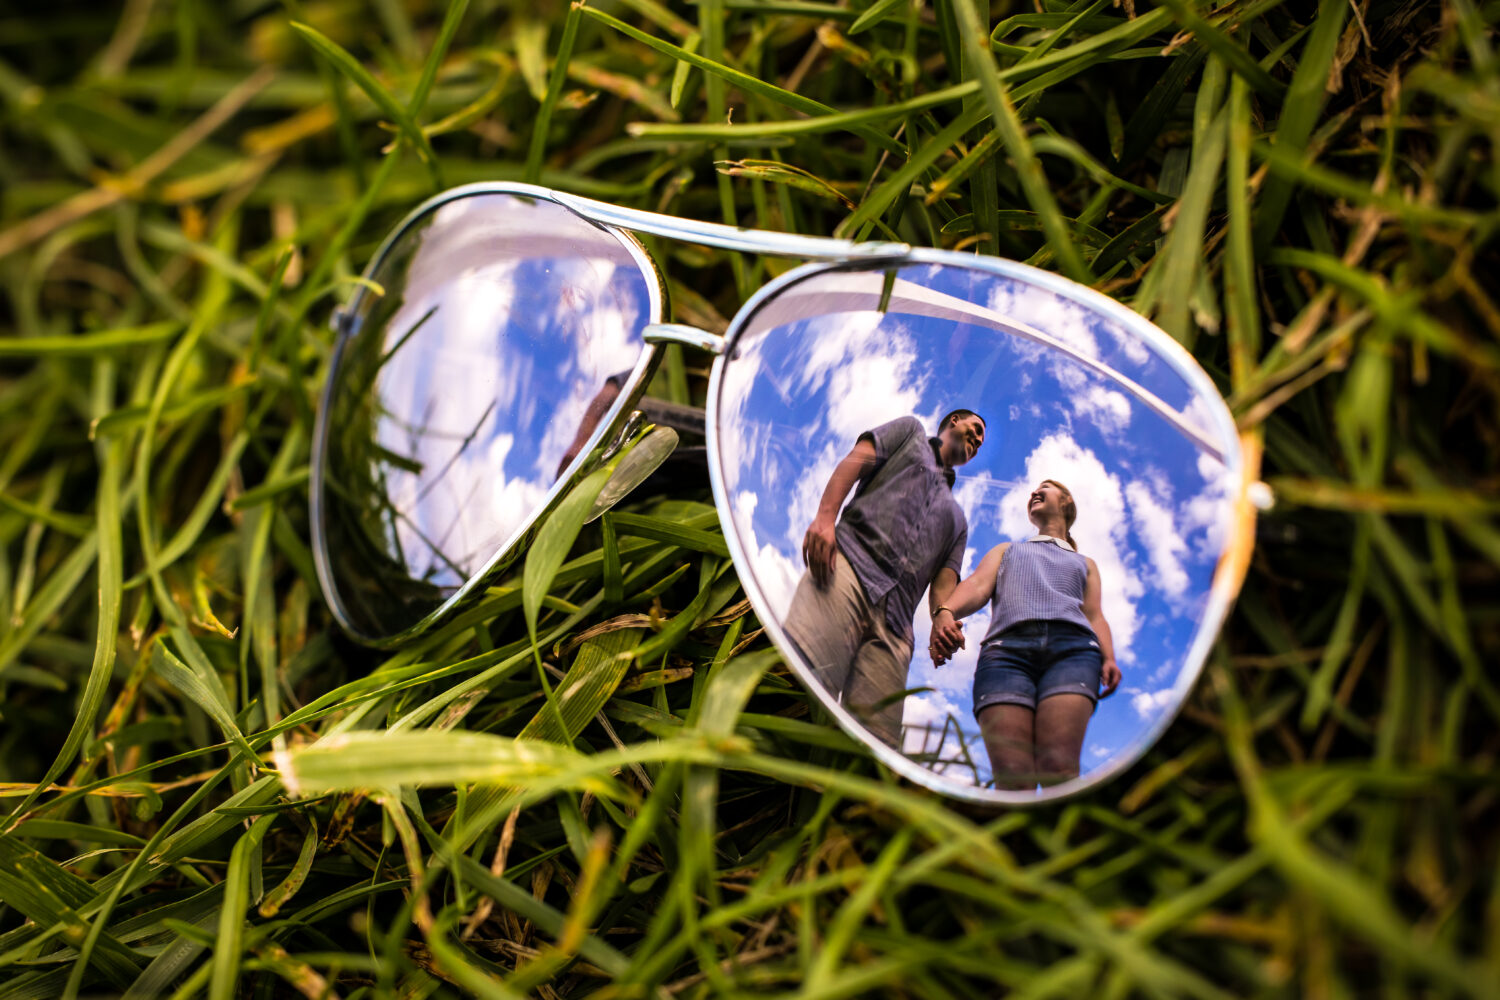 Creative Proposal Photographer, rhinehart photography, captures this creative, fun, unique image of the couple holding hands and exploring caught through the reflection on the sunglasses lens in st louis